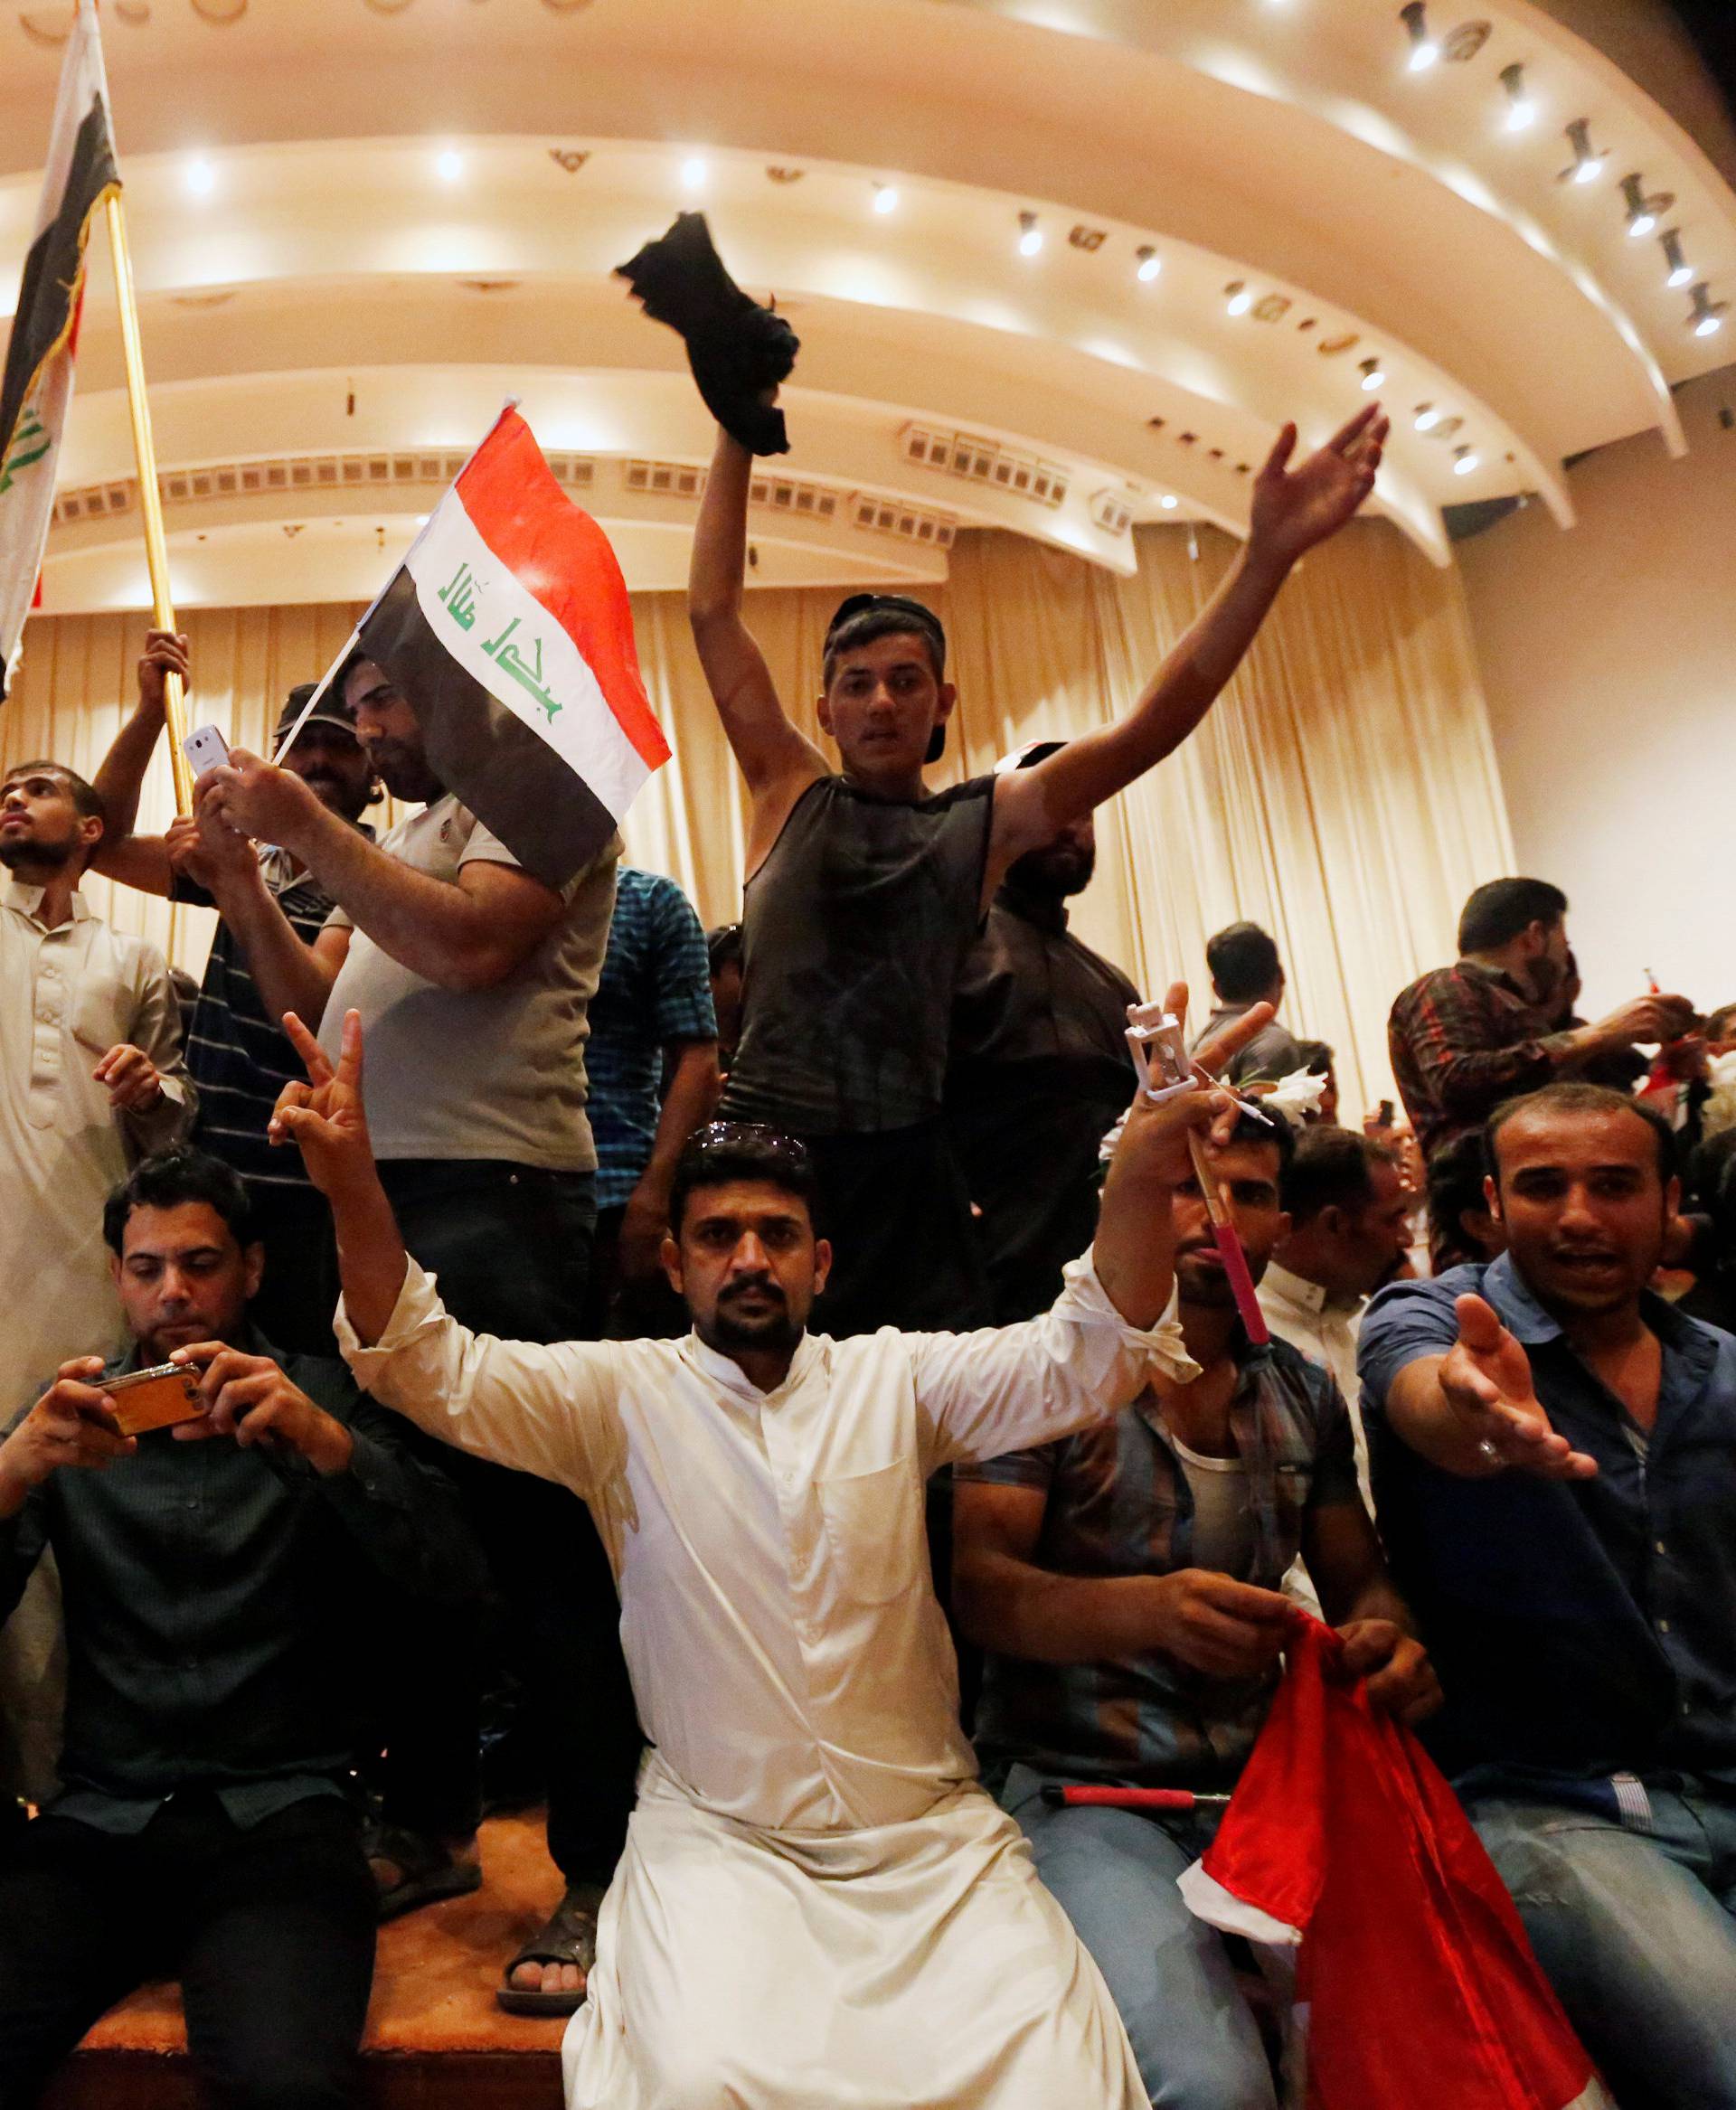 Followers of Iraq's Shi'ite cleric Moqtada al-Sadr are seen in the parliament building after they stormed Baghdad's Green Zone after lawmakers failed to convene for a vote on overhauling the government 